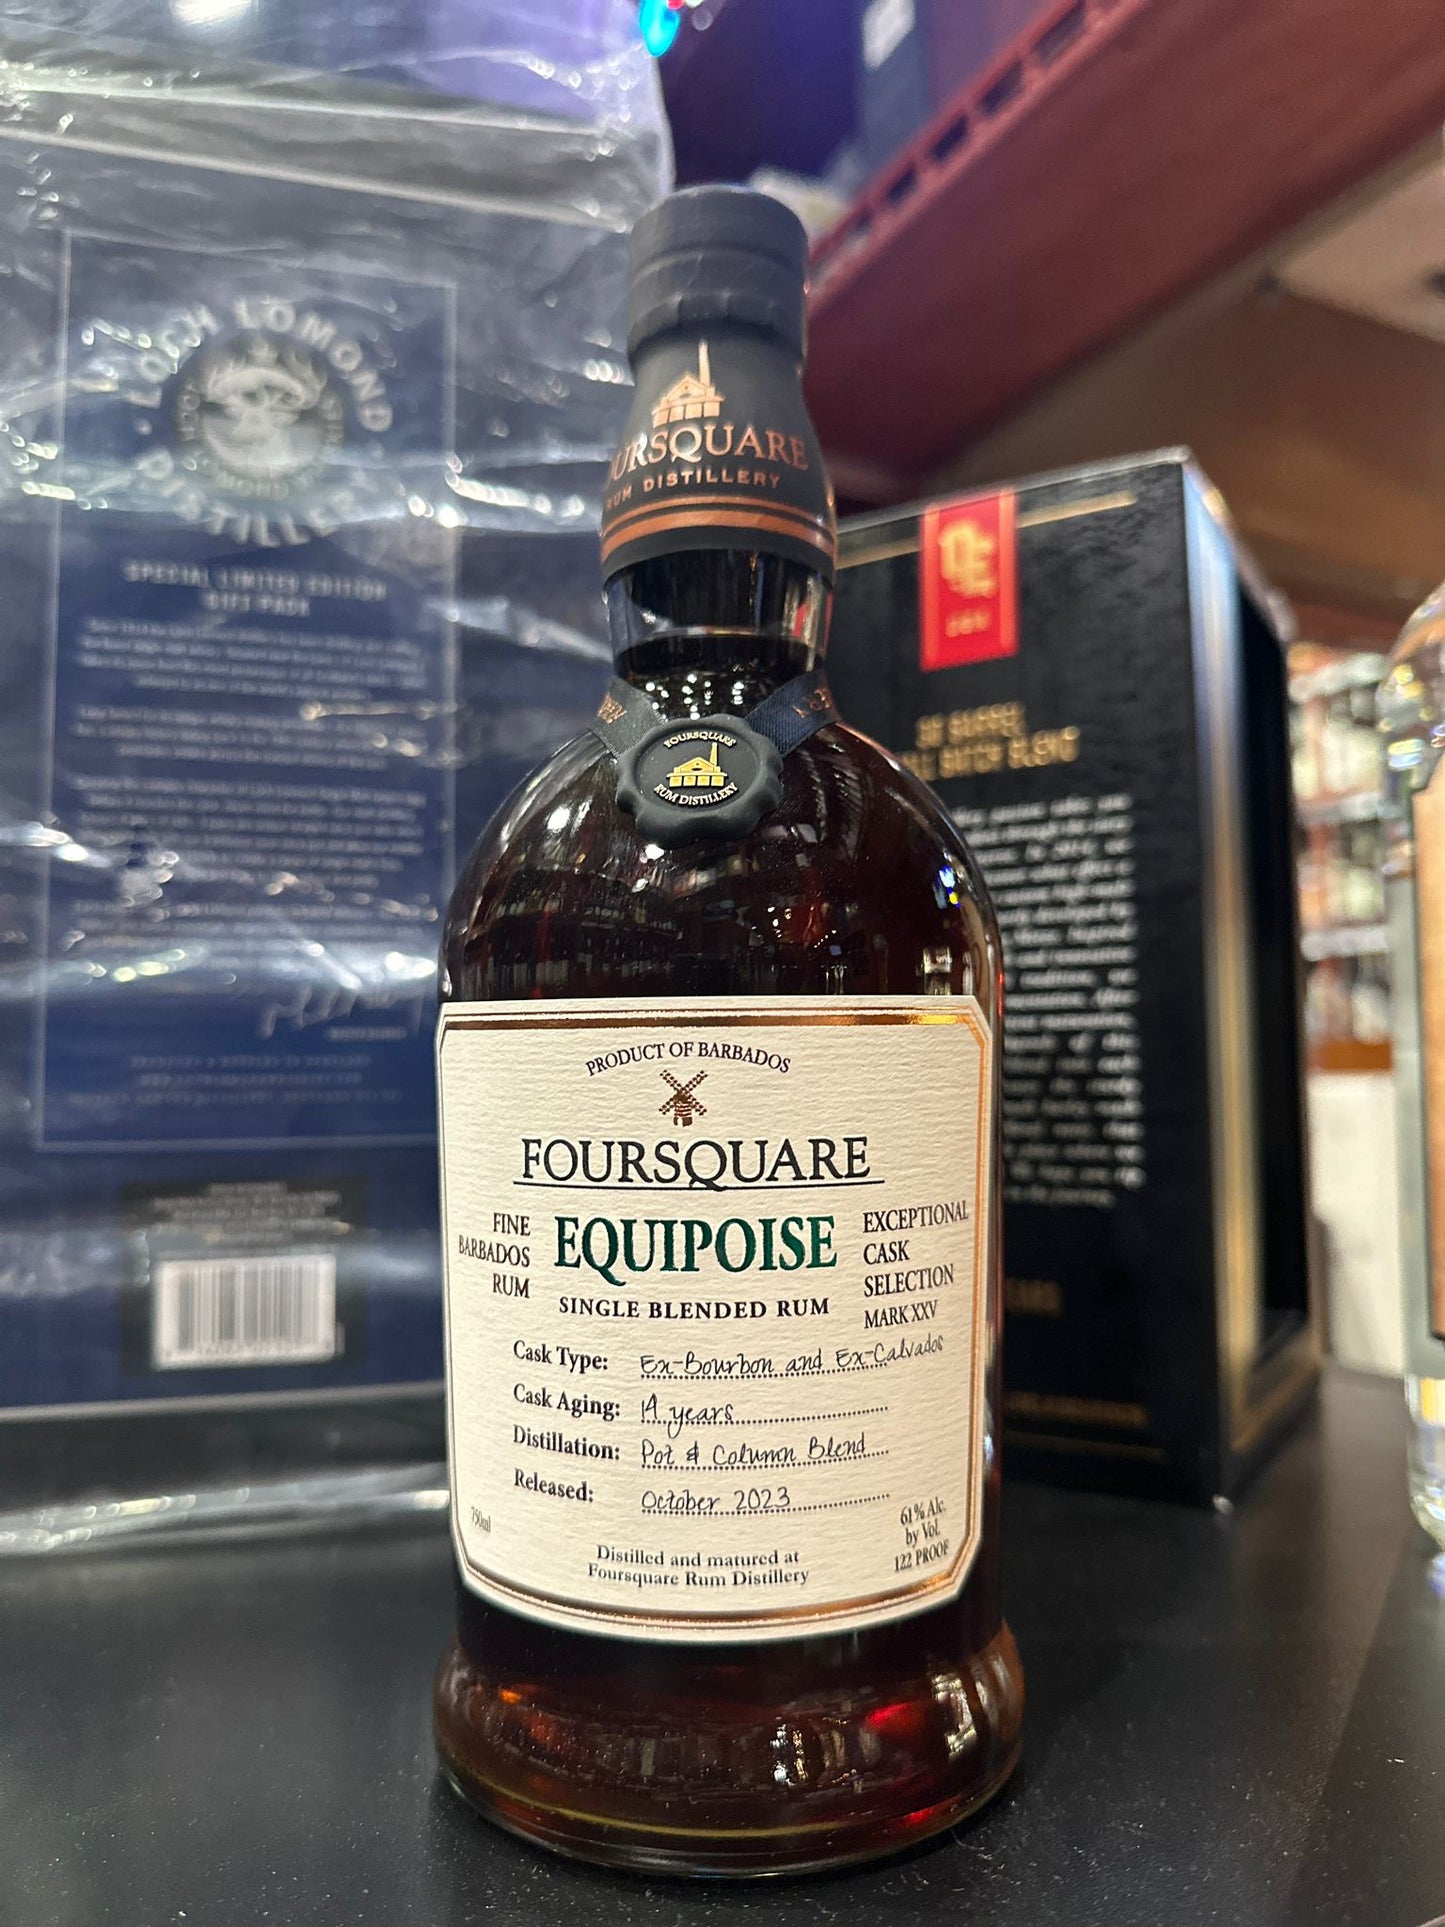 Foursquare Rum Distillery Equipoise Exceptional Cask Selection MARK XXV Single Blended Rum 750ml